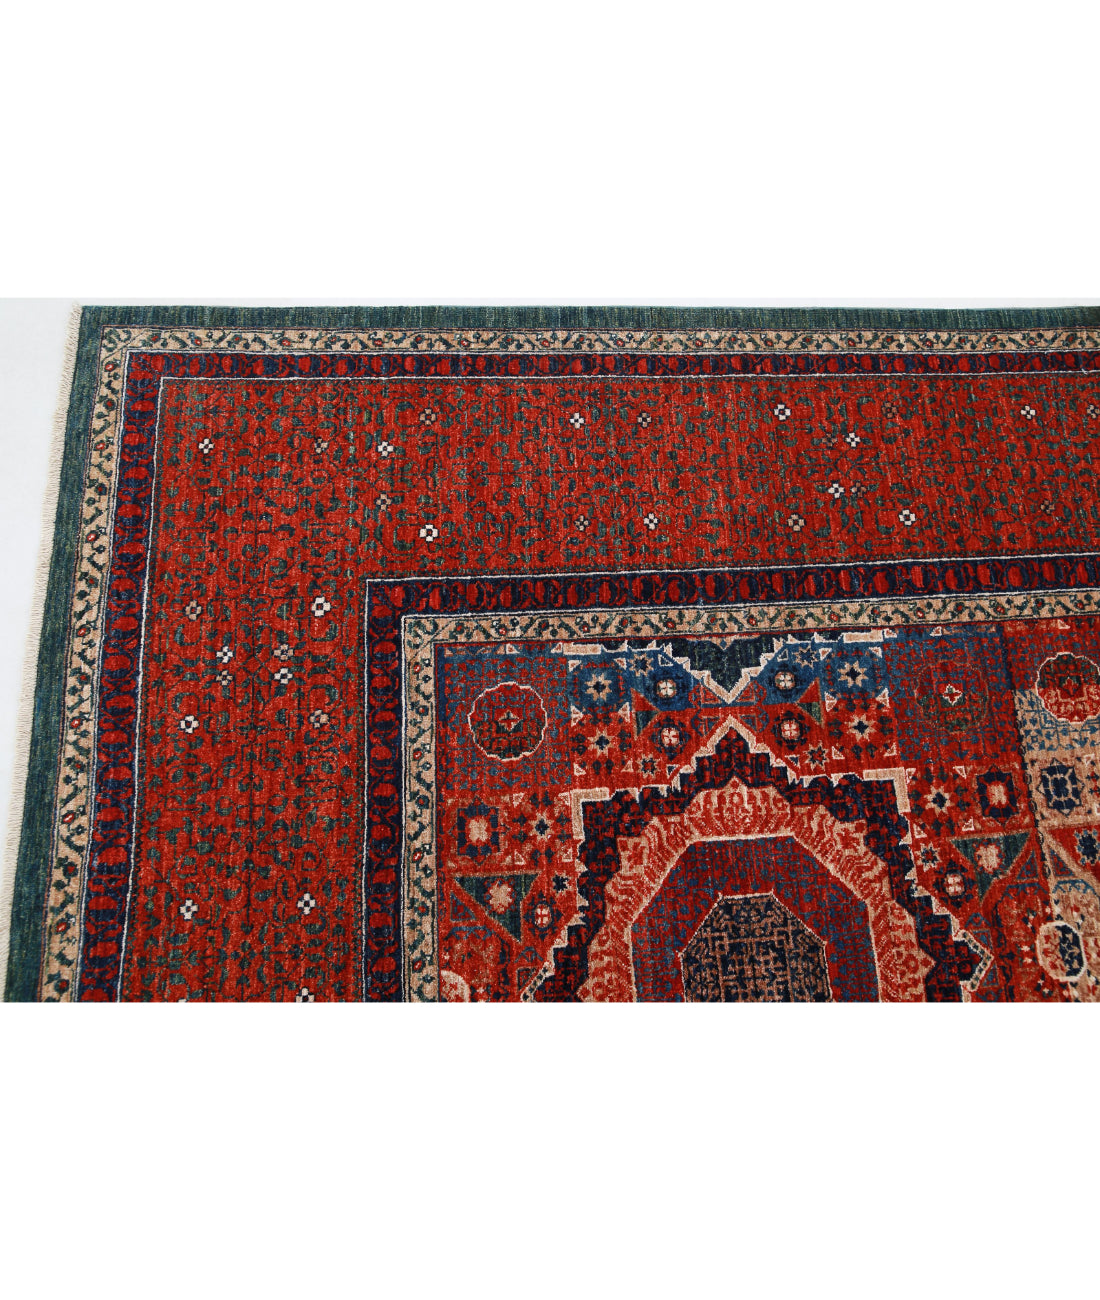 Hand Knotted Fine Mamluk Wool Rug - 10'2'' x 13'0'' 10'2'' x 13'0'' (305 X 390) / Green / Red